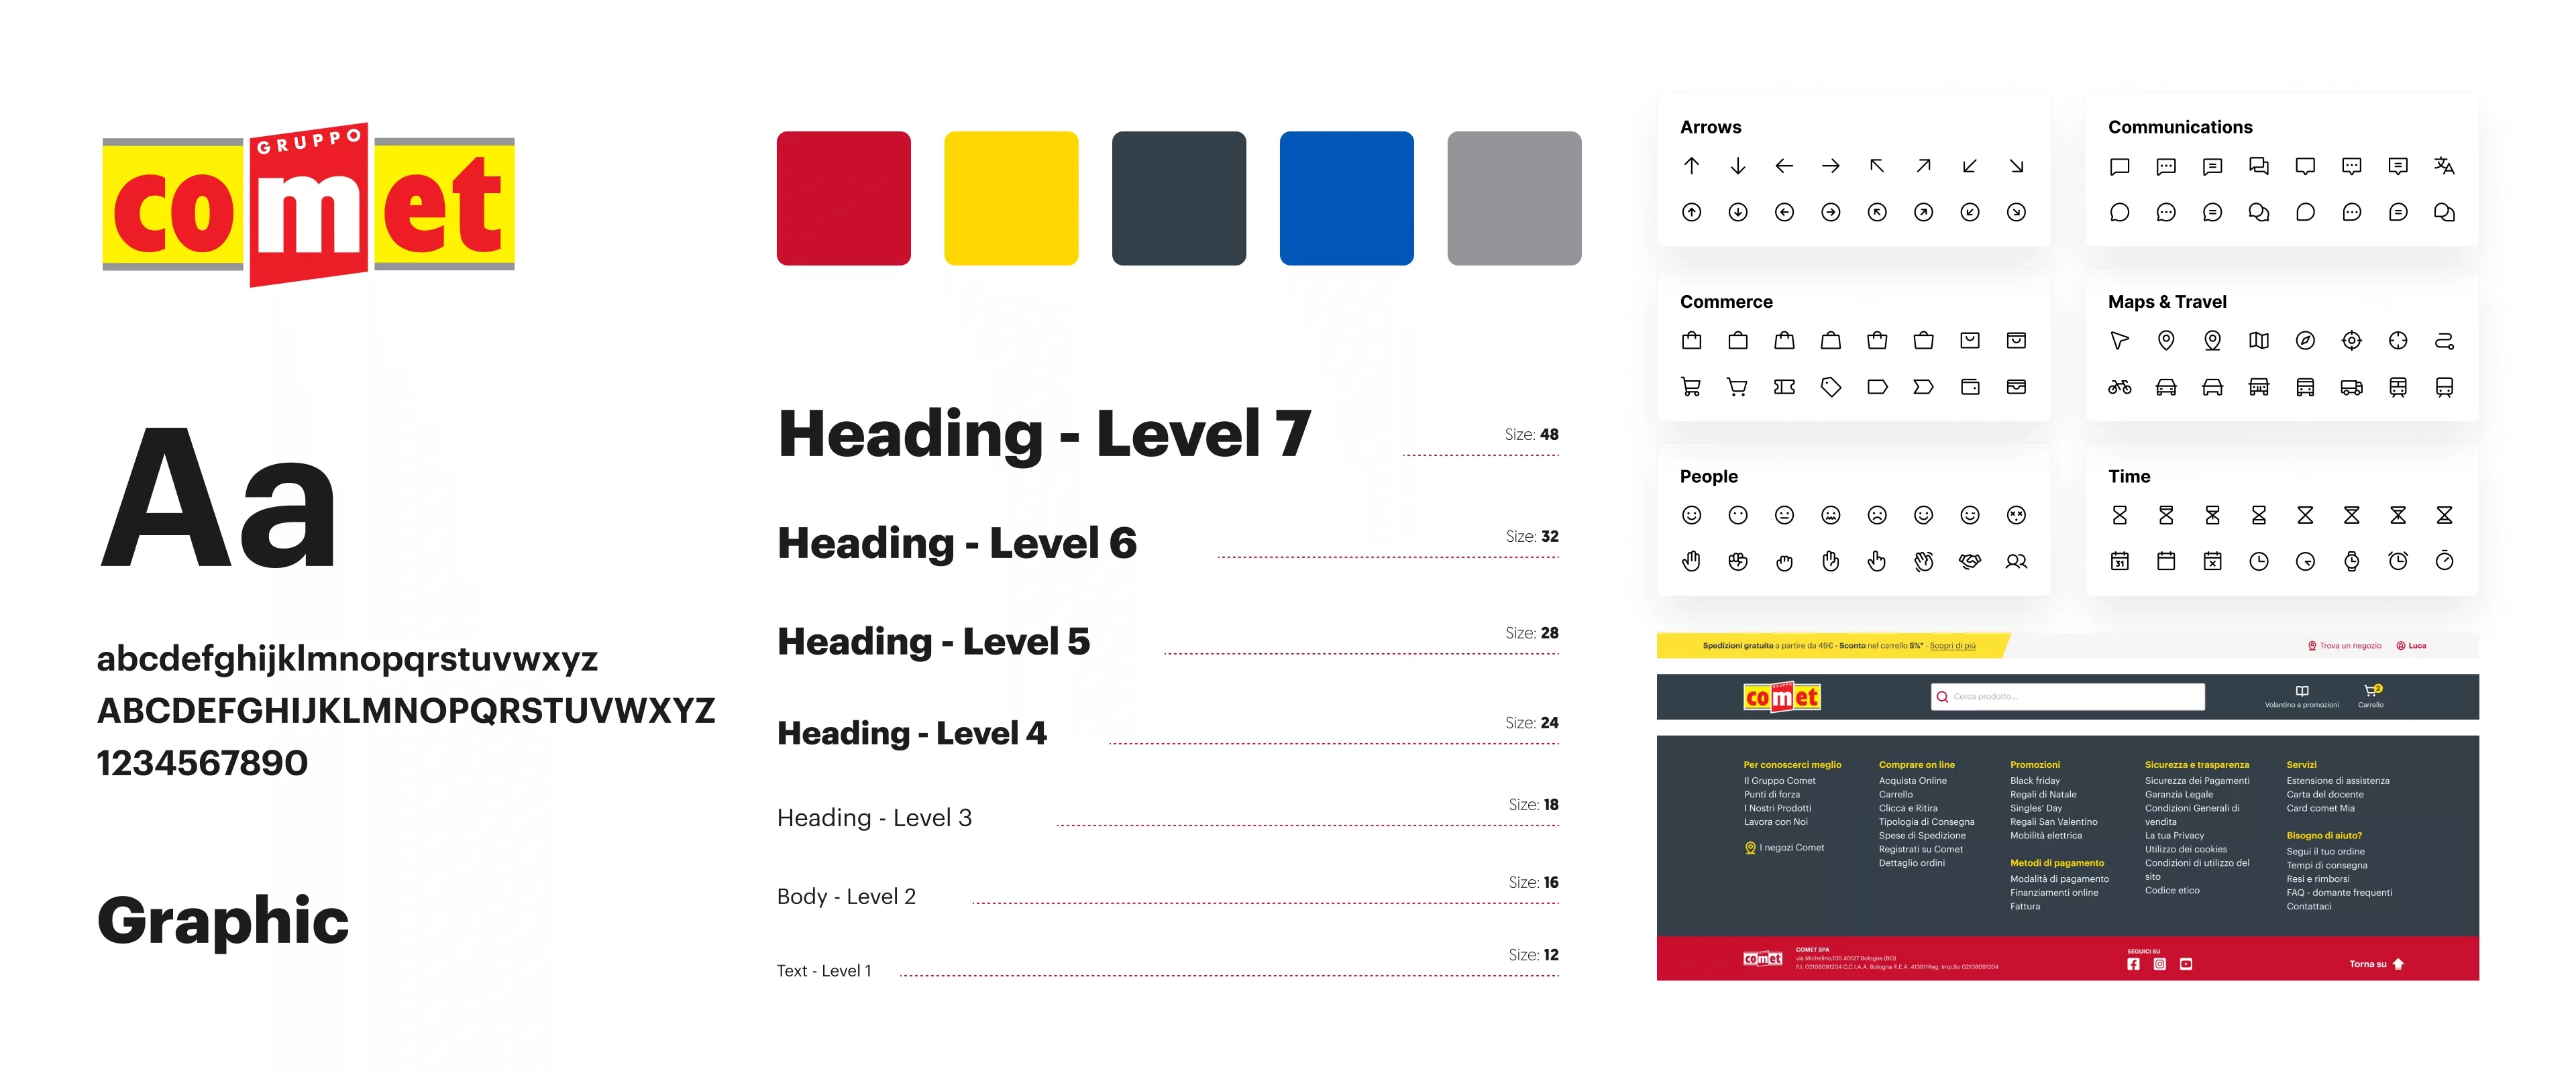 Components from the design system created for Comet such as colour palette, logo, typography and more